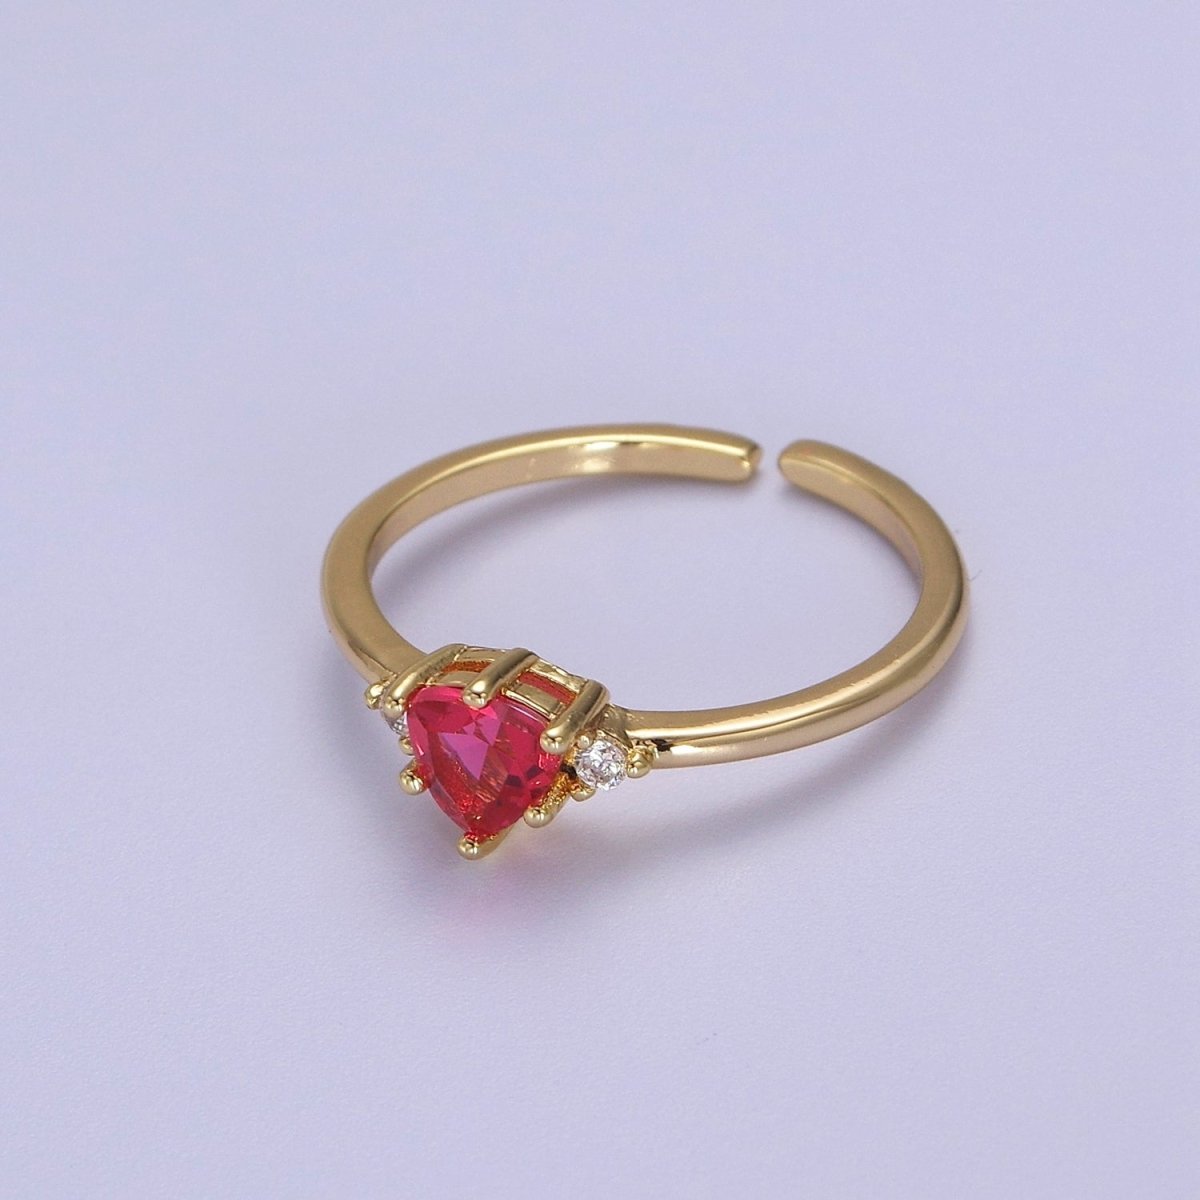 Minimalist Heart Ring, Gold Filled Stacking Ring, Pink CZ Heart Ring Open Adjustable S-532 - DLUXCA